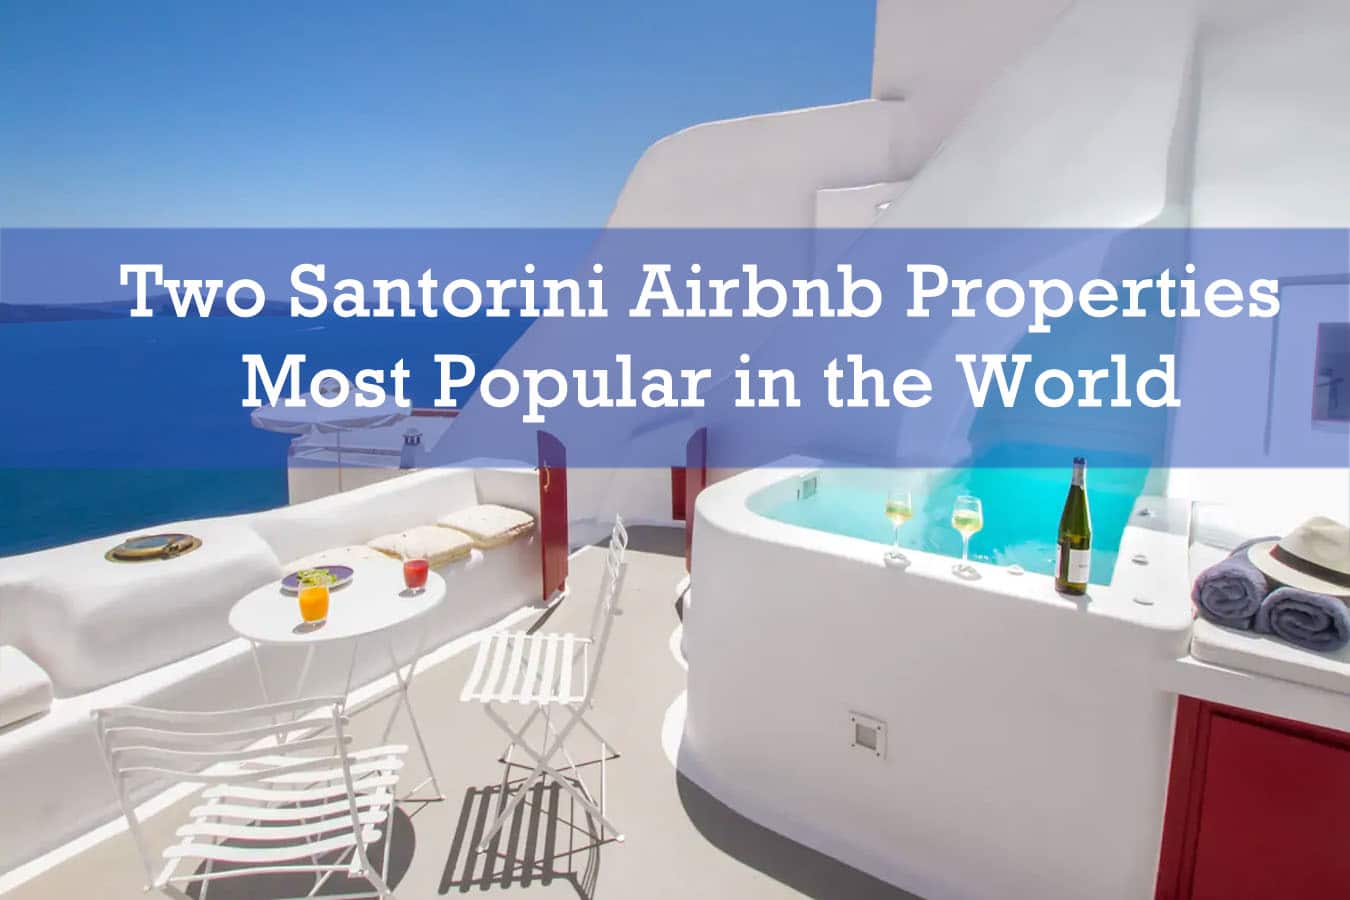 Two Santorini Airbnb Properties Among Most Popular in the World